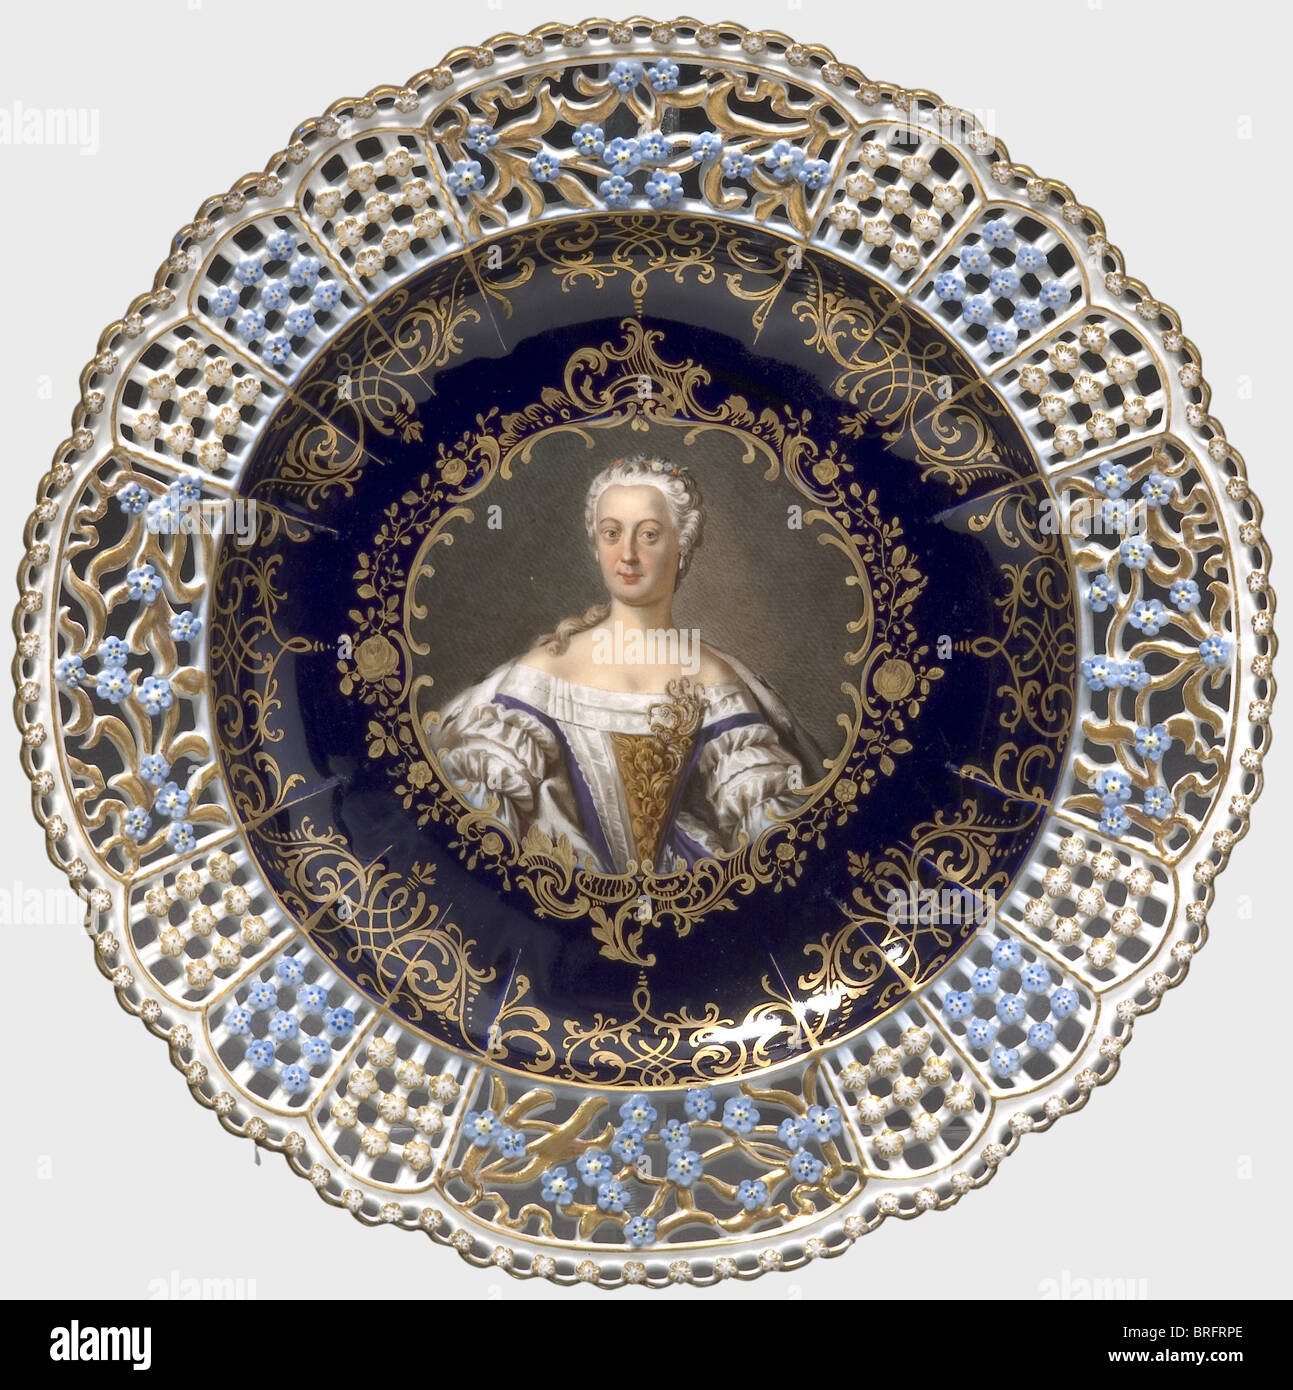 Queen Elisabeth Christina of Prussia (1715 - 1797) an openwork plate, Meissen, circa 1860, with a fine hand-painted portrait of Frederick the Great's wife on a cobalt blue/golden background in the centre. The subject is identified on the back, which also displays an underglaze sword mark. Diameter 24.5 cm. people, 19th century, 18th century, Prussian, Prussia, German, Germany, militaria, military, object, objects, stills, clipping, clippings, cut out, cut-out, cut-outs, dishes, dish, plate, plates, Stock Photo